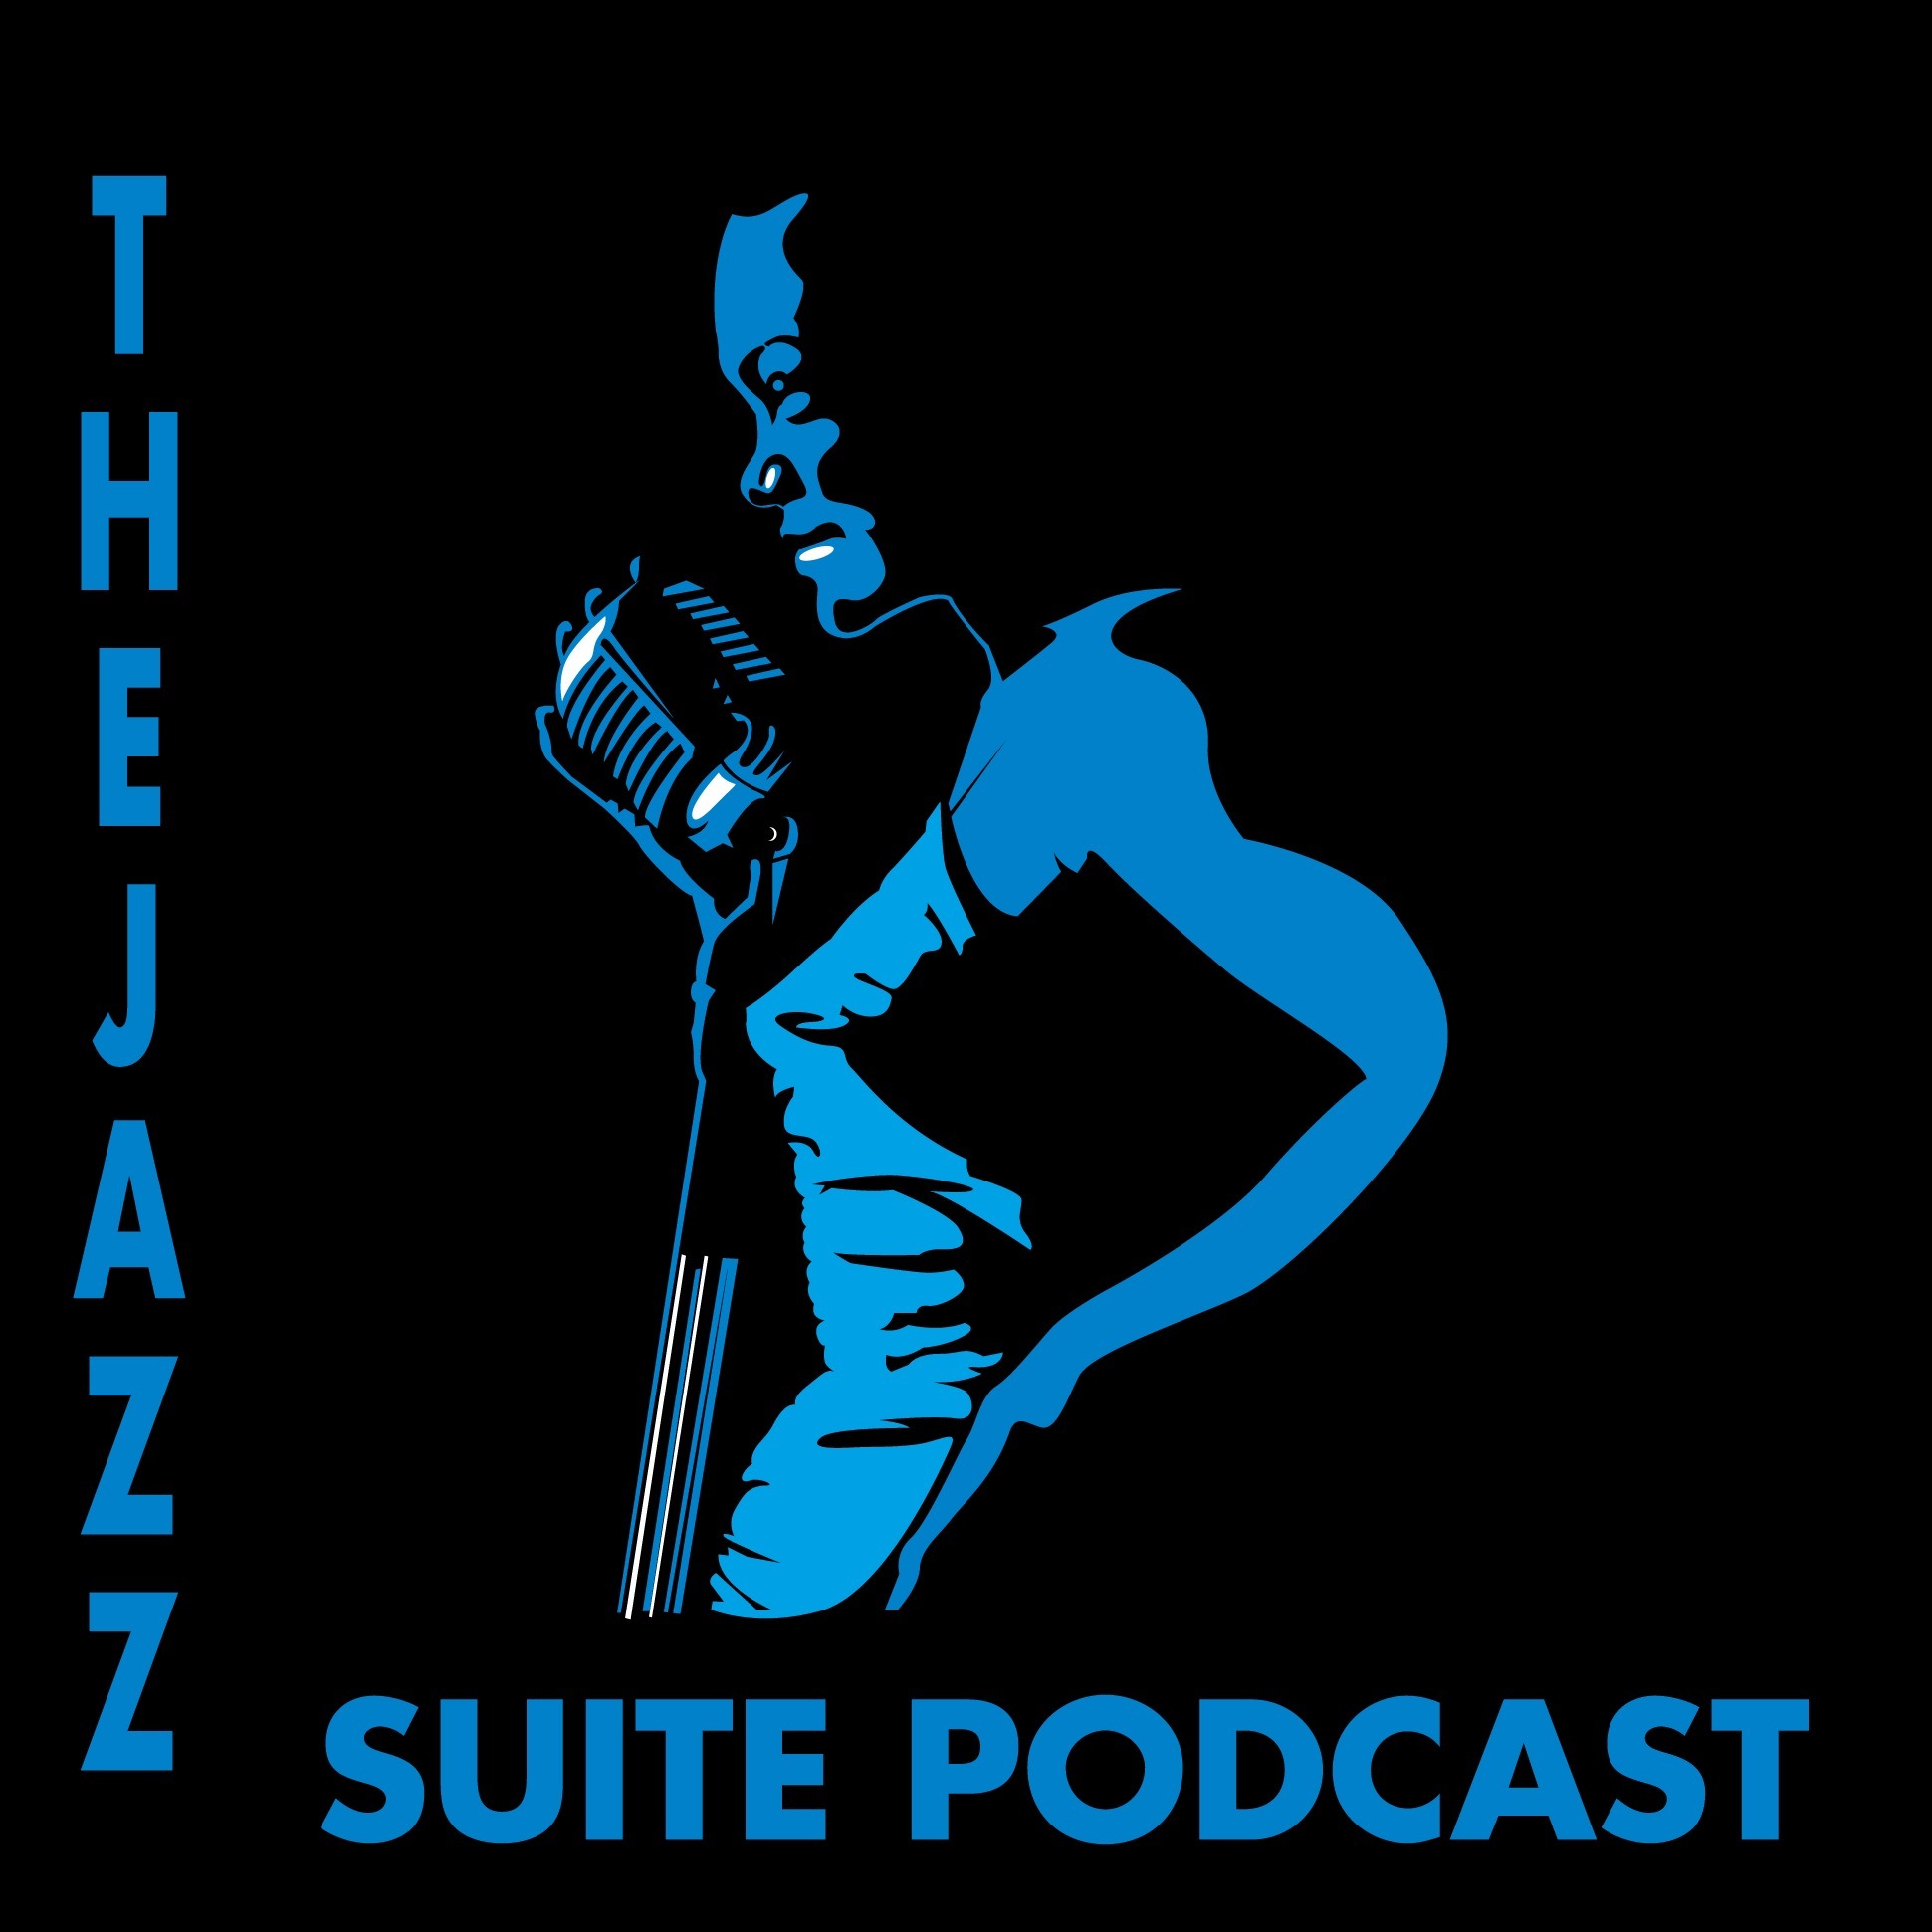 The Jazz Suite Podcast Show #454